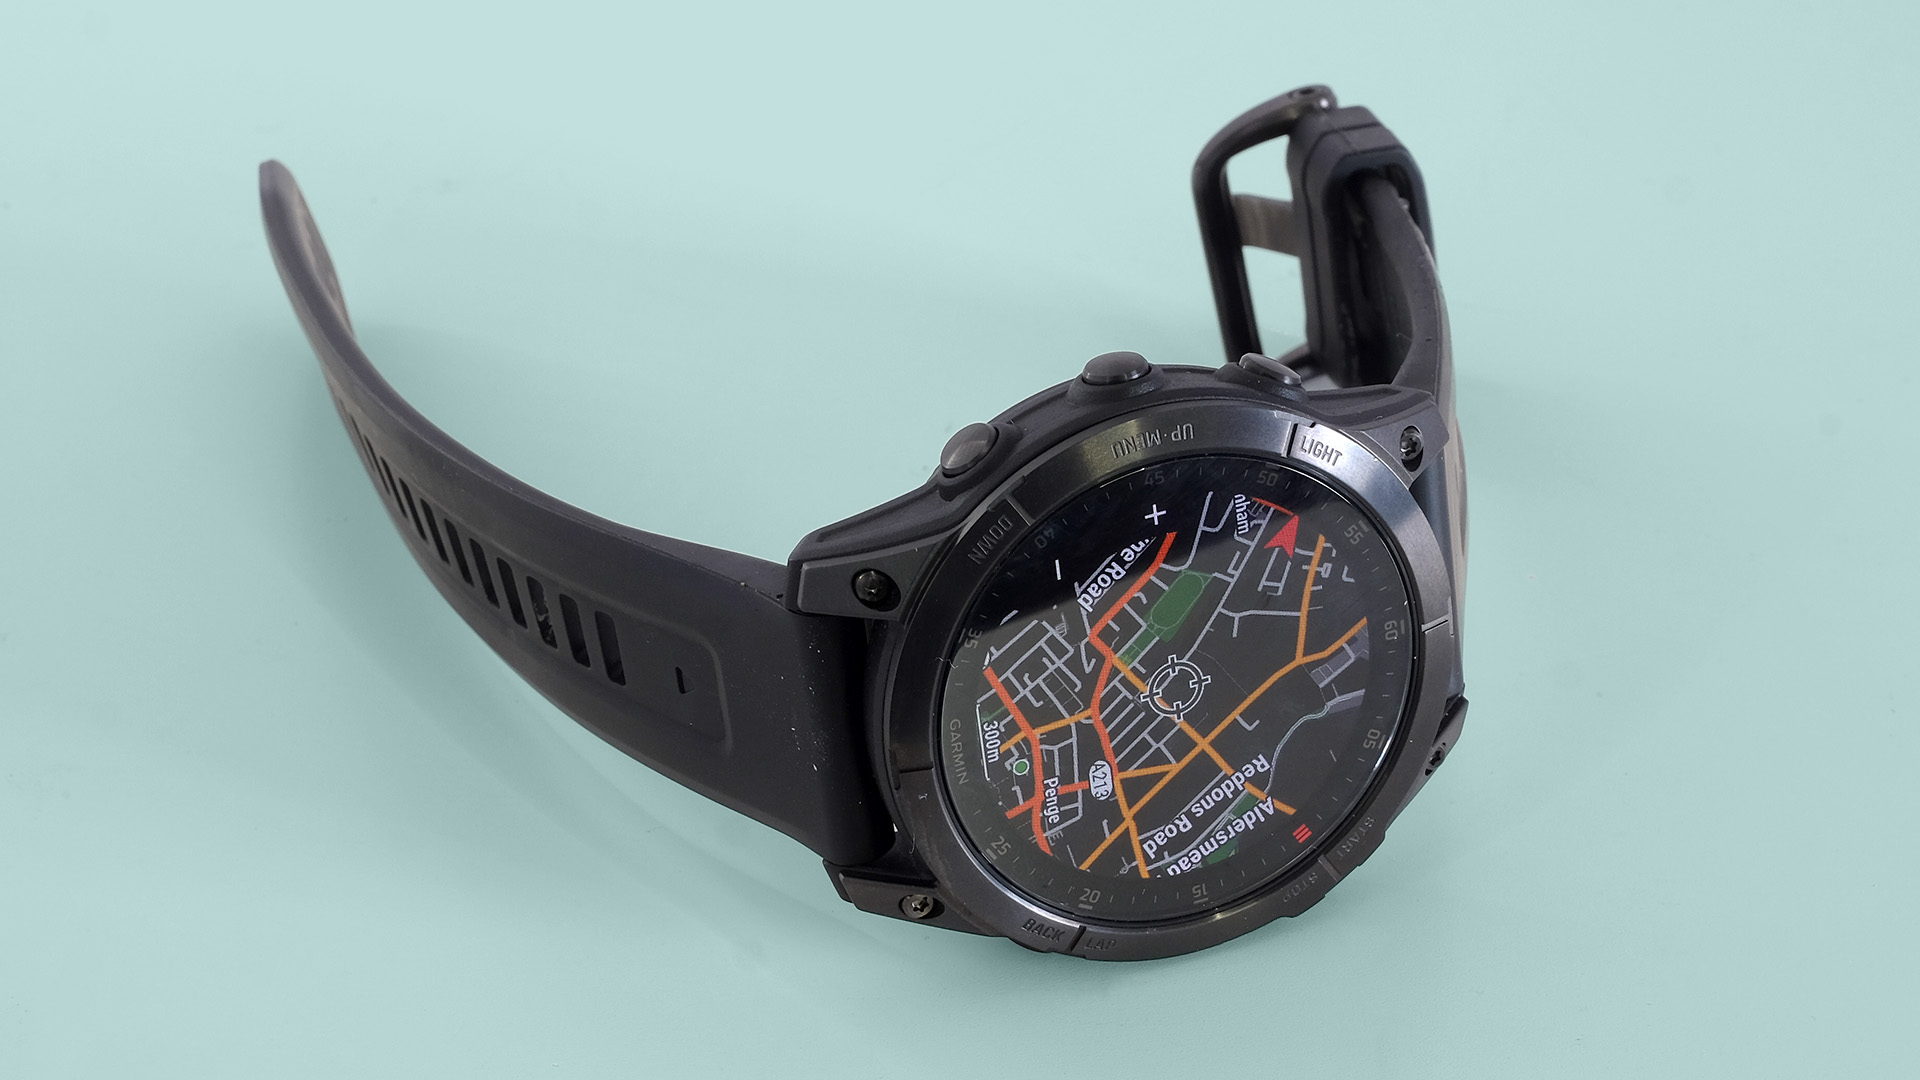 Garmin Epix 2 tilted on its side showing the map on the watch face